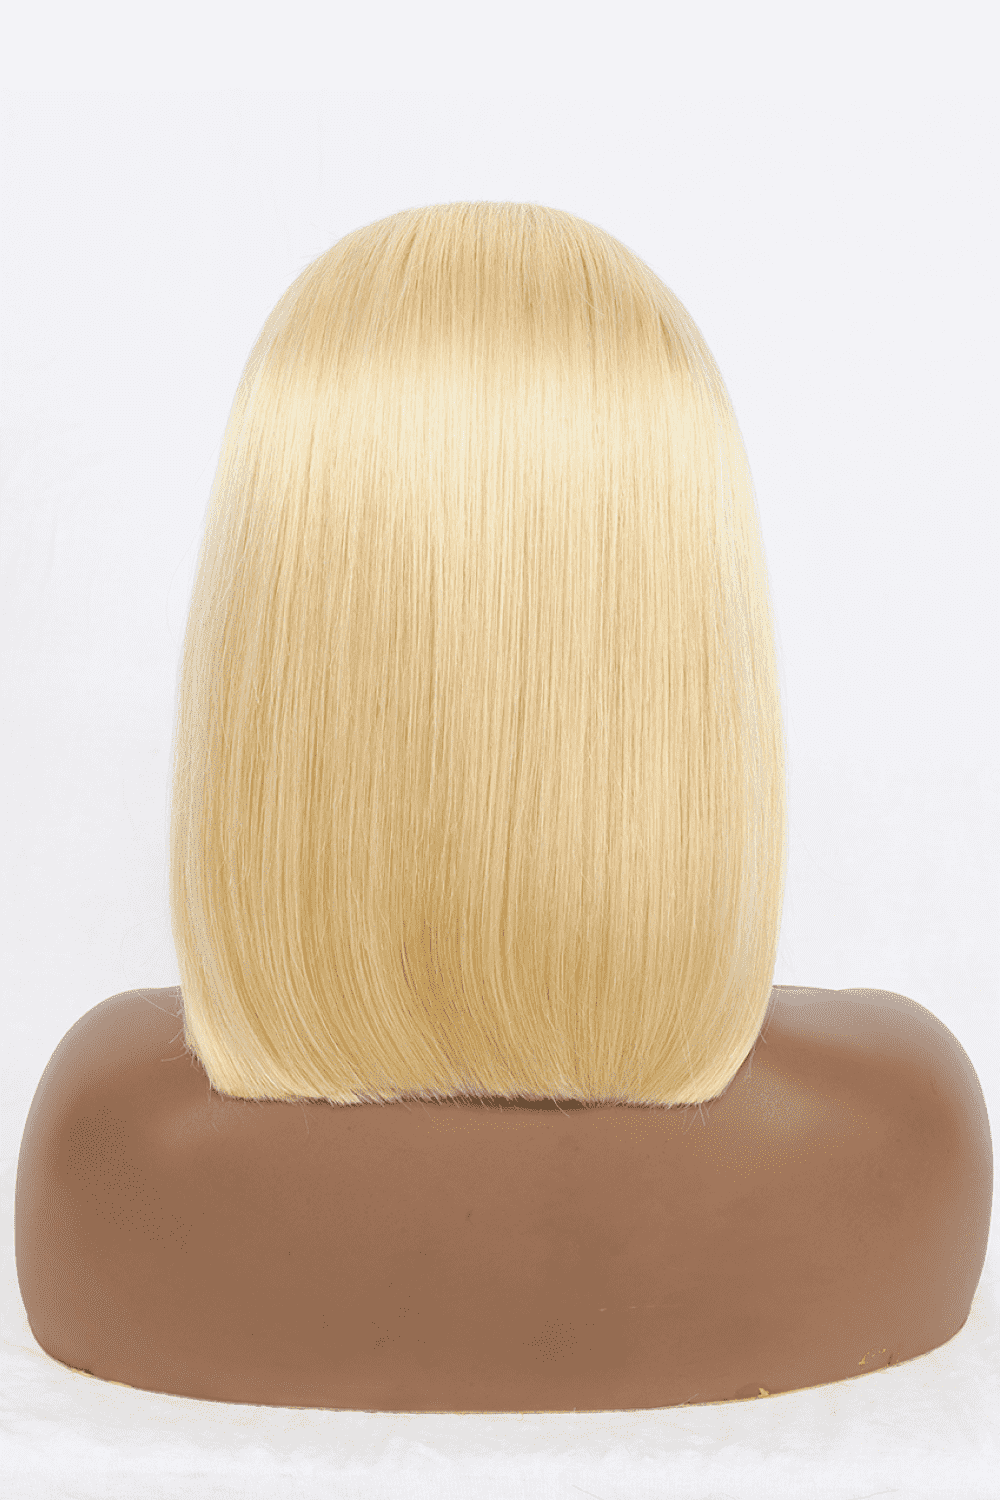 a blonde wig on a mannequin head